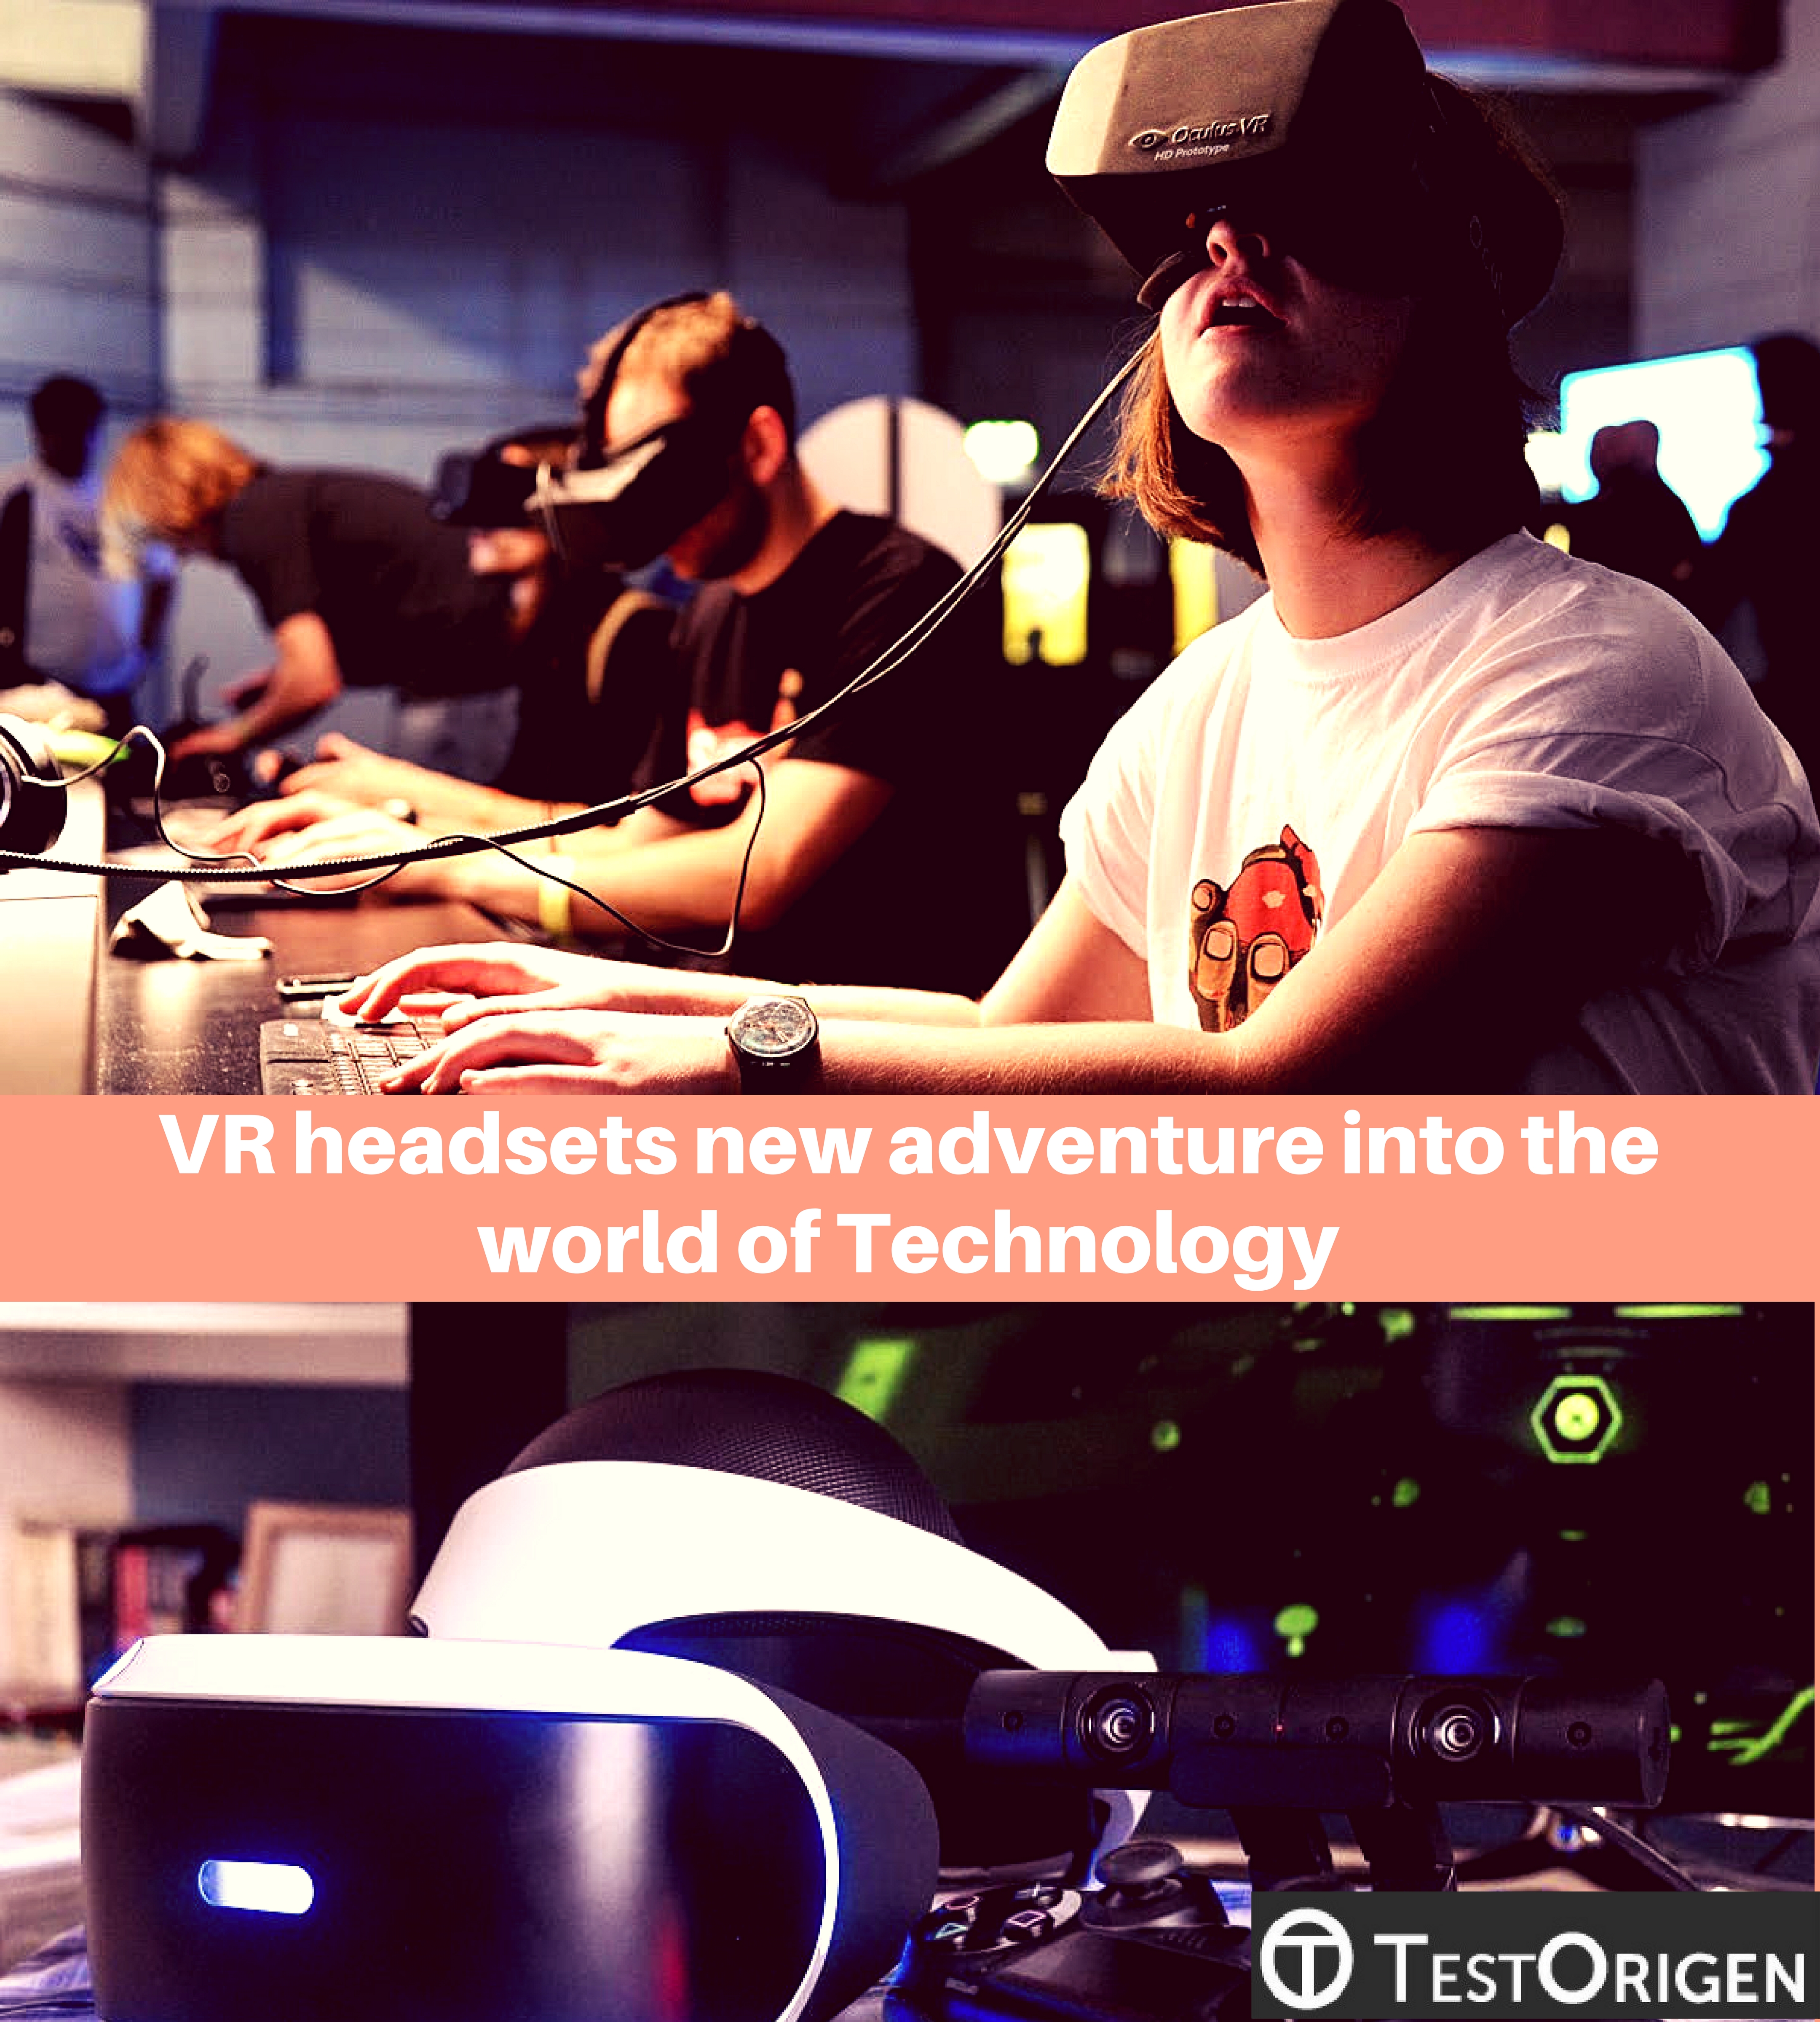 VR headsets, ‘new adventure’ into the world of Technology